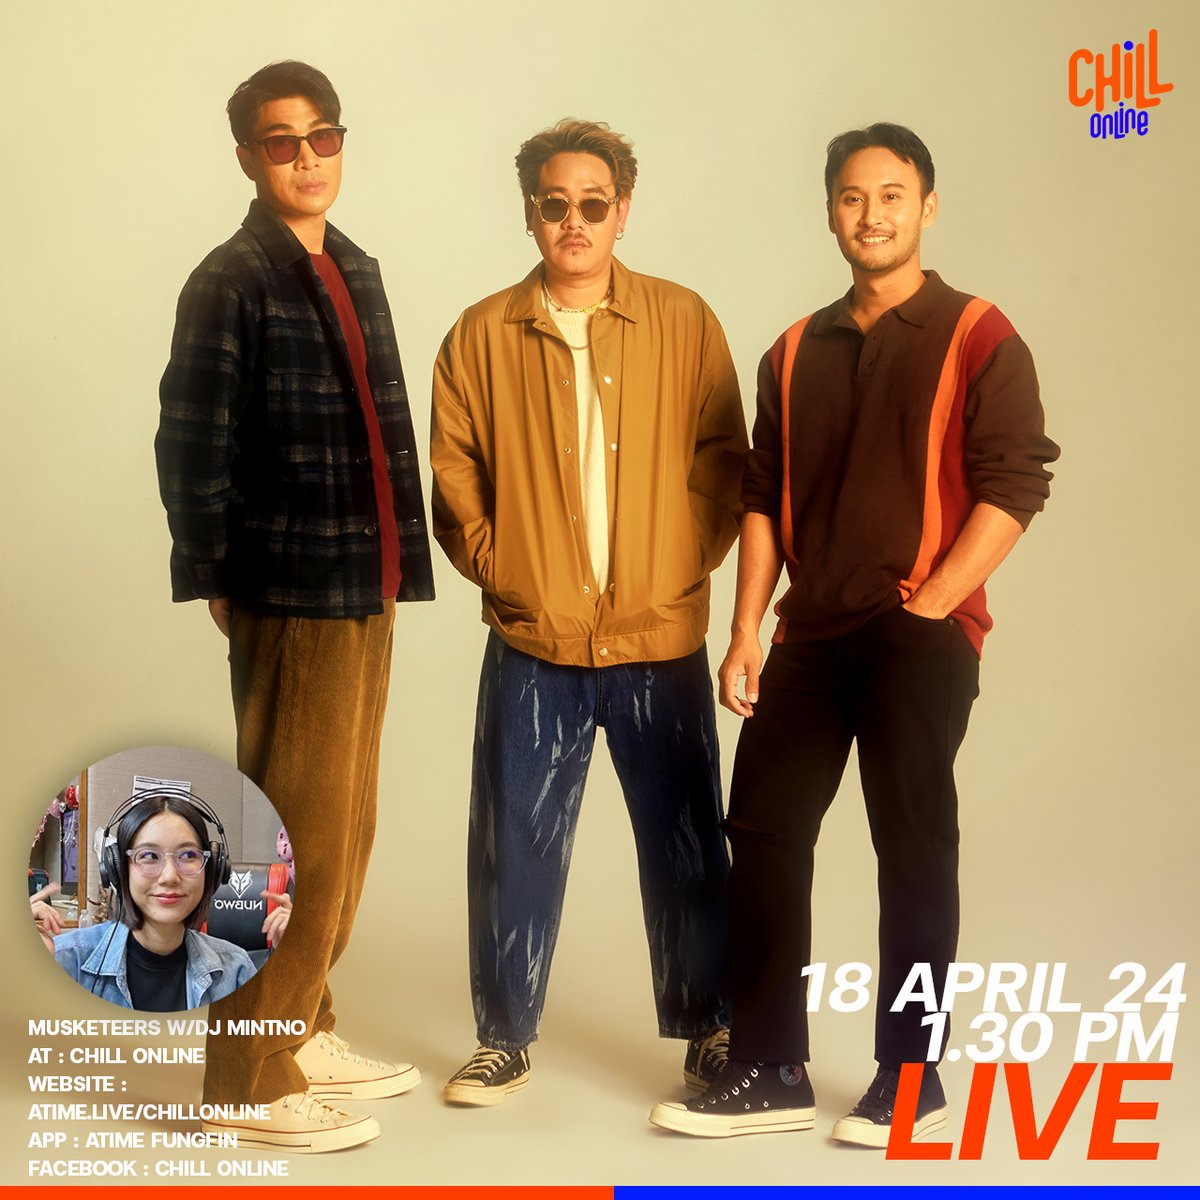 LIVE INTERVIEW
Musketeers
w/DJ MINTNO at Chill Online
18 APRIL 24
1.30 PM
atime.live/chillonline
or application : Atime Fungfin
Facebook : Chill Online
Stay Tuned!
.
#ChillOnline #WorkingChillingShopping
#Sea
#Musketeers
#Whattheduckmusic
#MusketeersxChillOnline